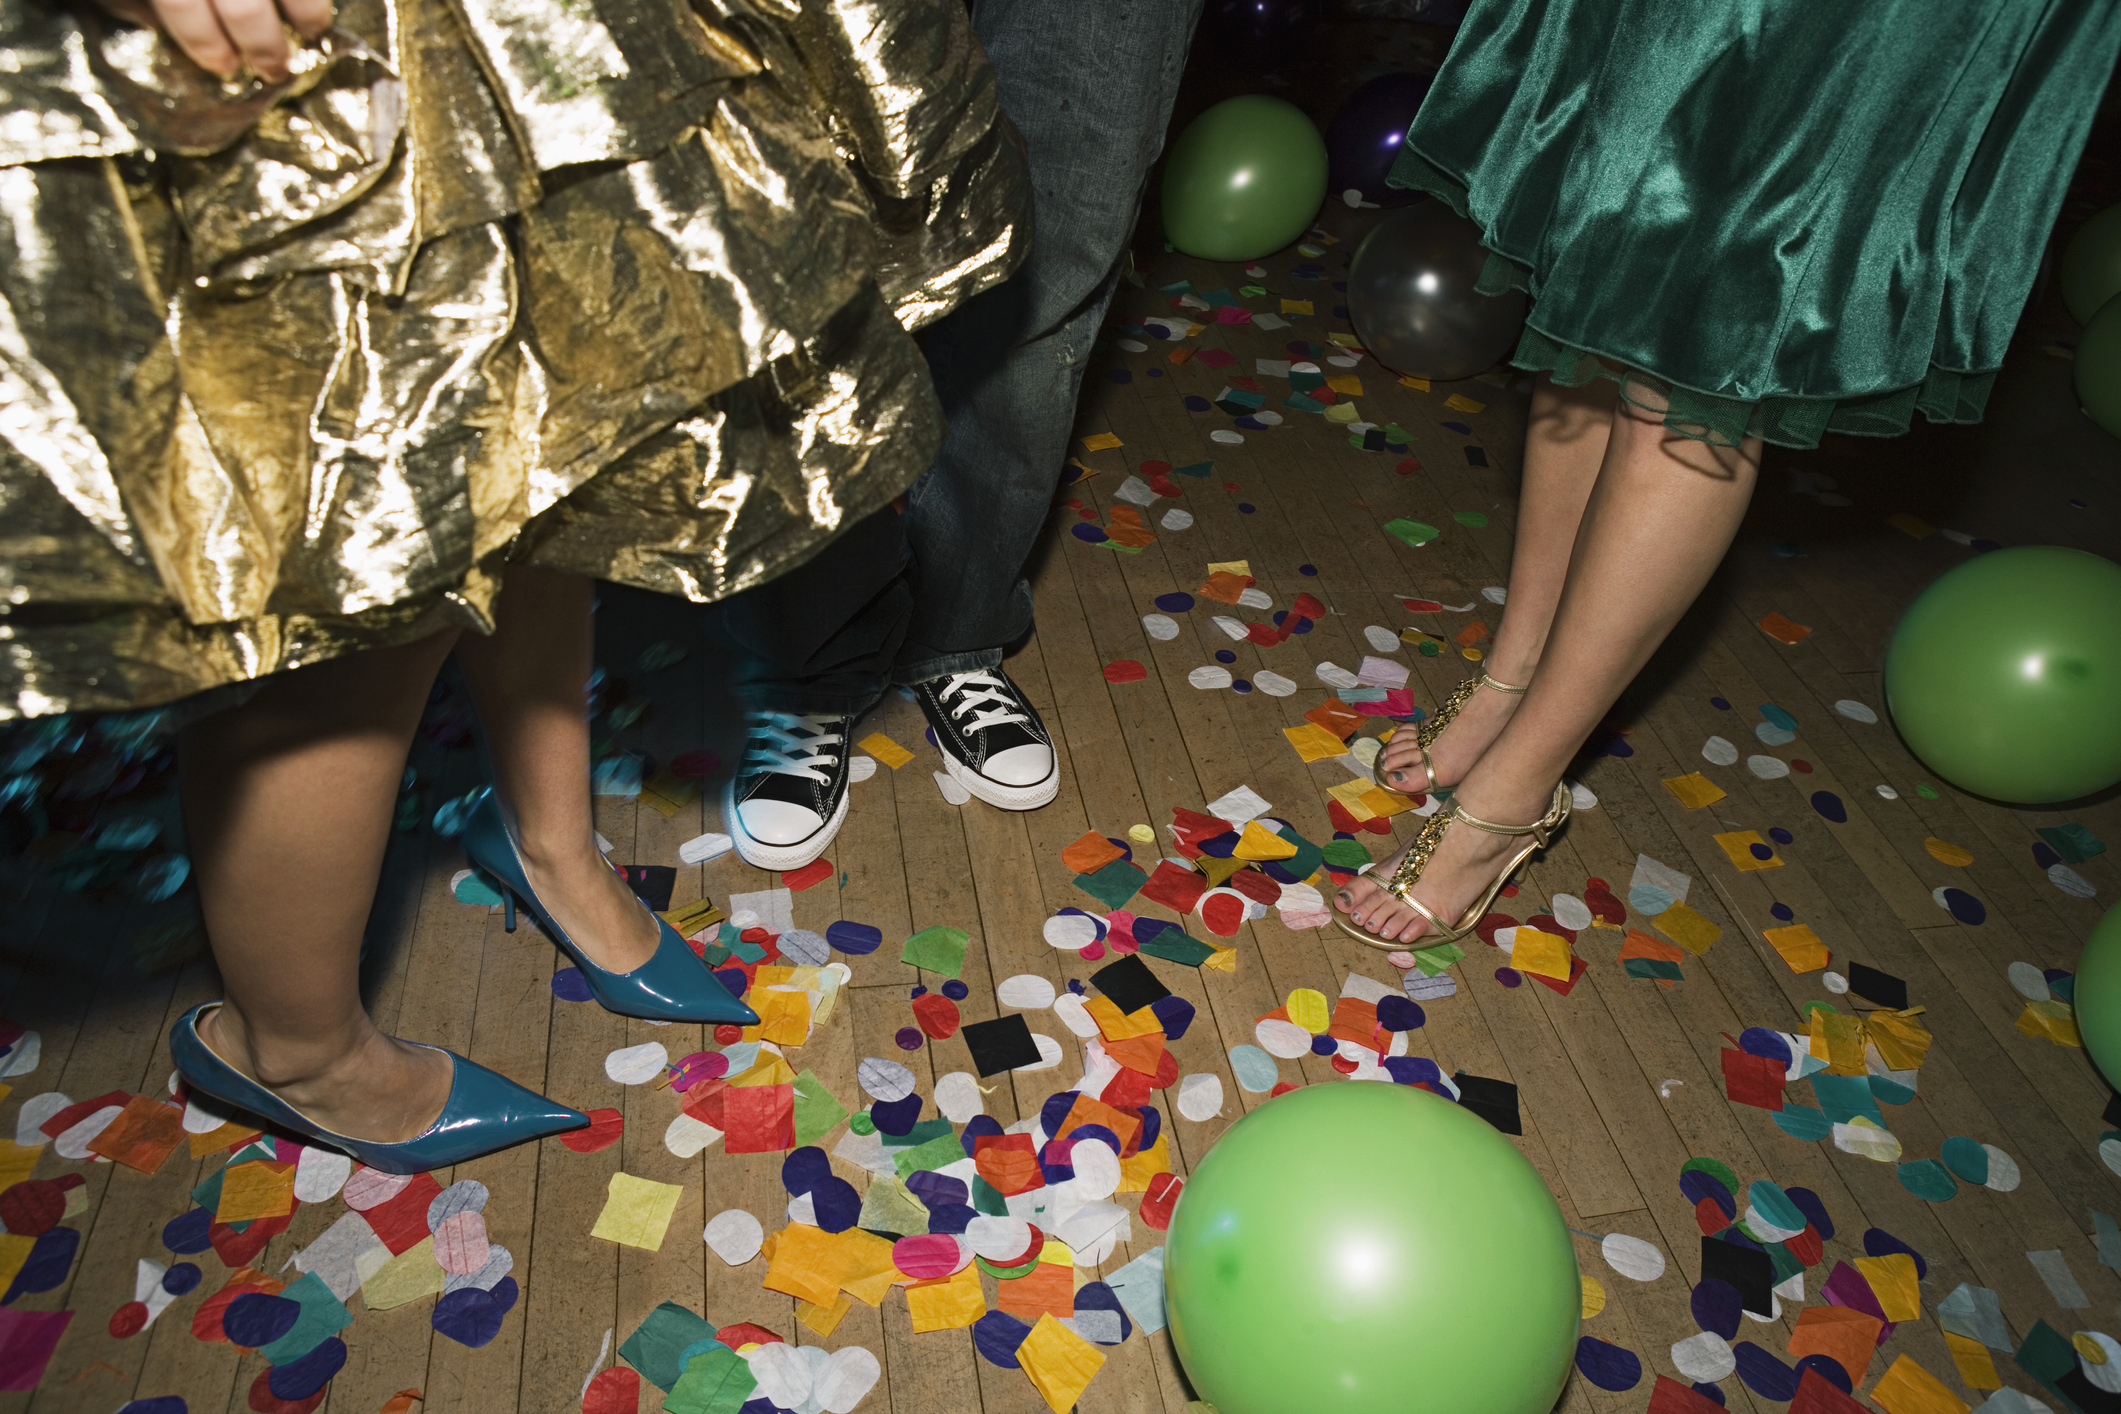 People at a party with colorful confetti and balloons on the floor